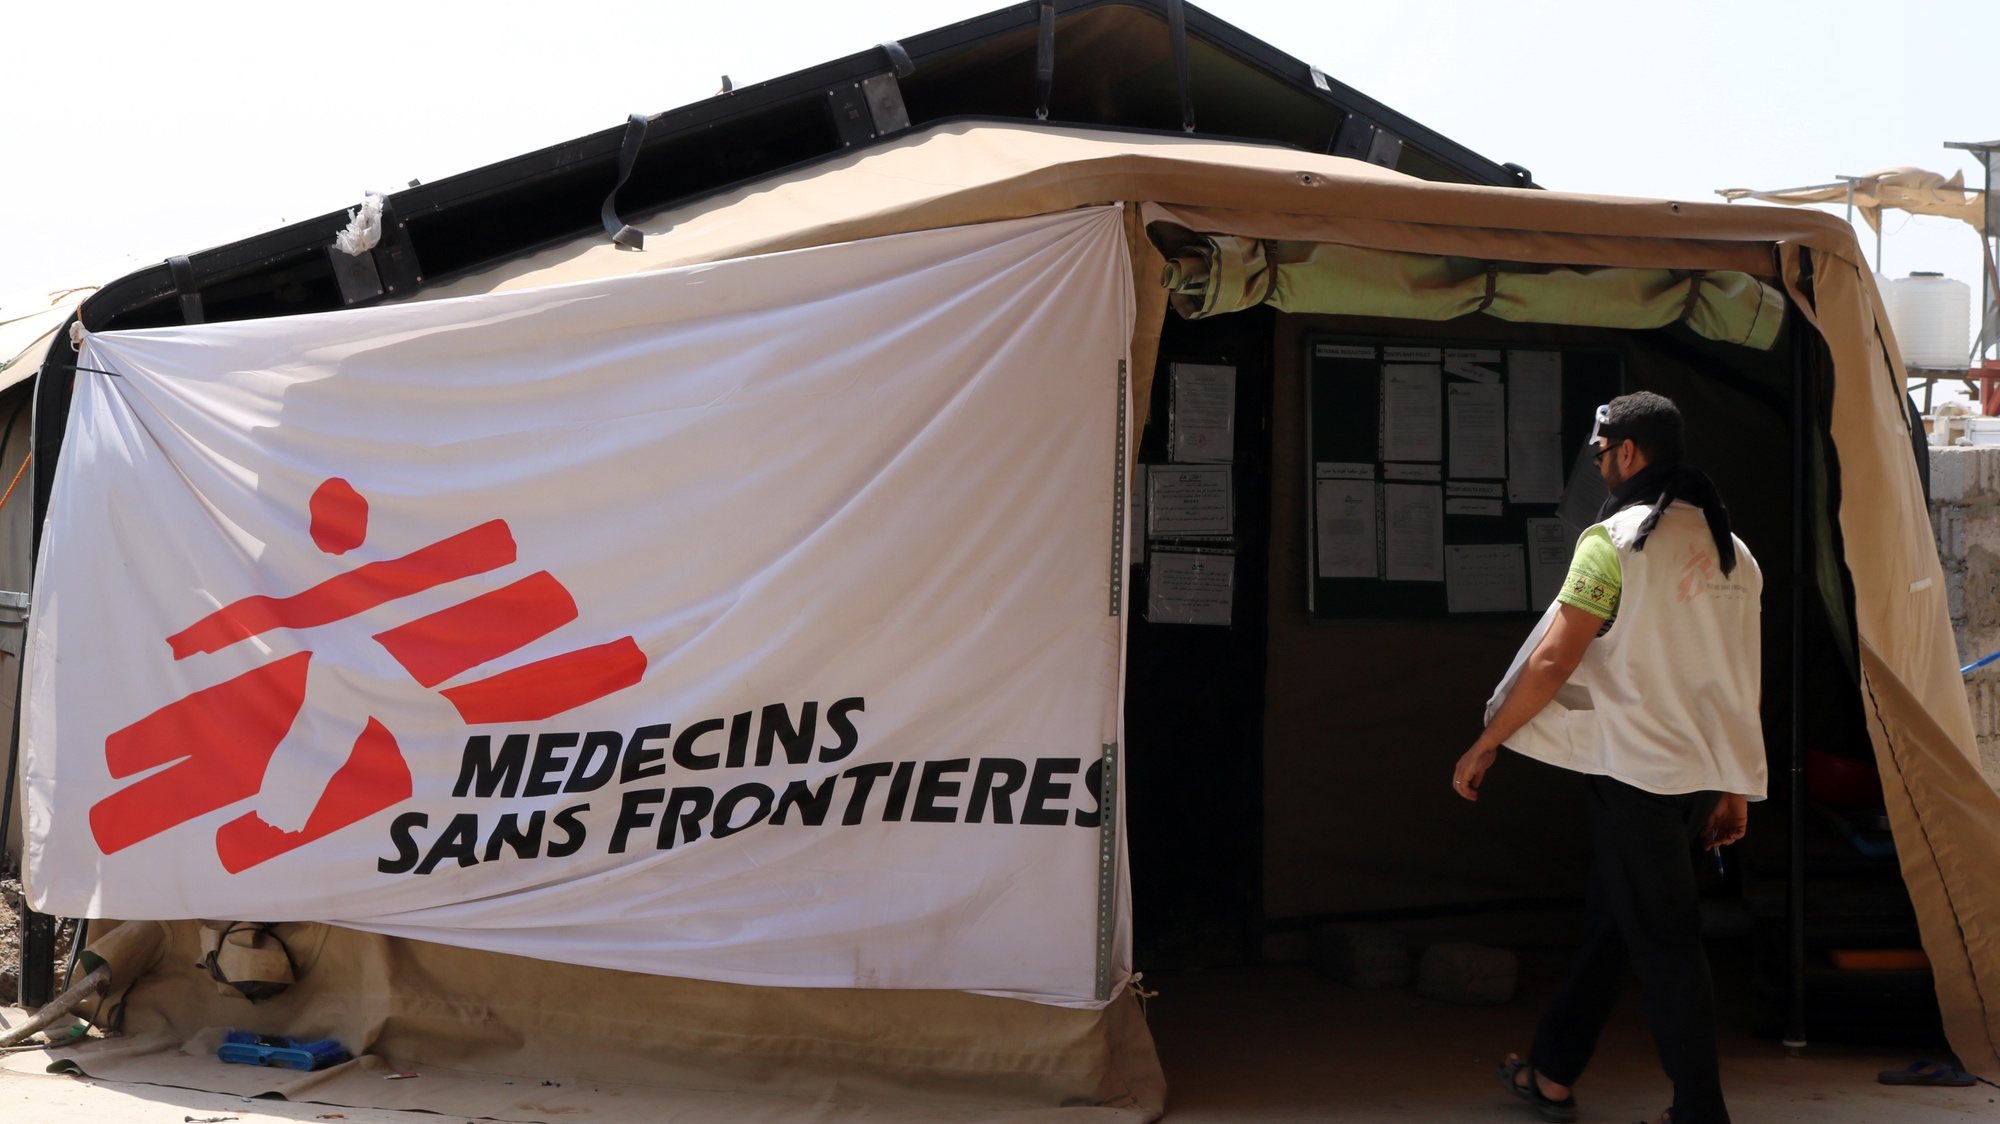 epa07986289 A staff of Doctors Without Borders (MSF) enters an alternative emergency tent after a MSF-run hospital was partially destroyed during an airstrike in the southwestern city of Mocha, Yemen, 10 November 2019.  According to reports, a hospital managed by Doctors Without Borders (MSF) in the Yemeni city of Mocha was partially destroyed four days ago during an airstrike that hit surrounding buildings, including a military warehouse. No casualties were reported.  EPA/NAJEEB ALMAHBOOBI